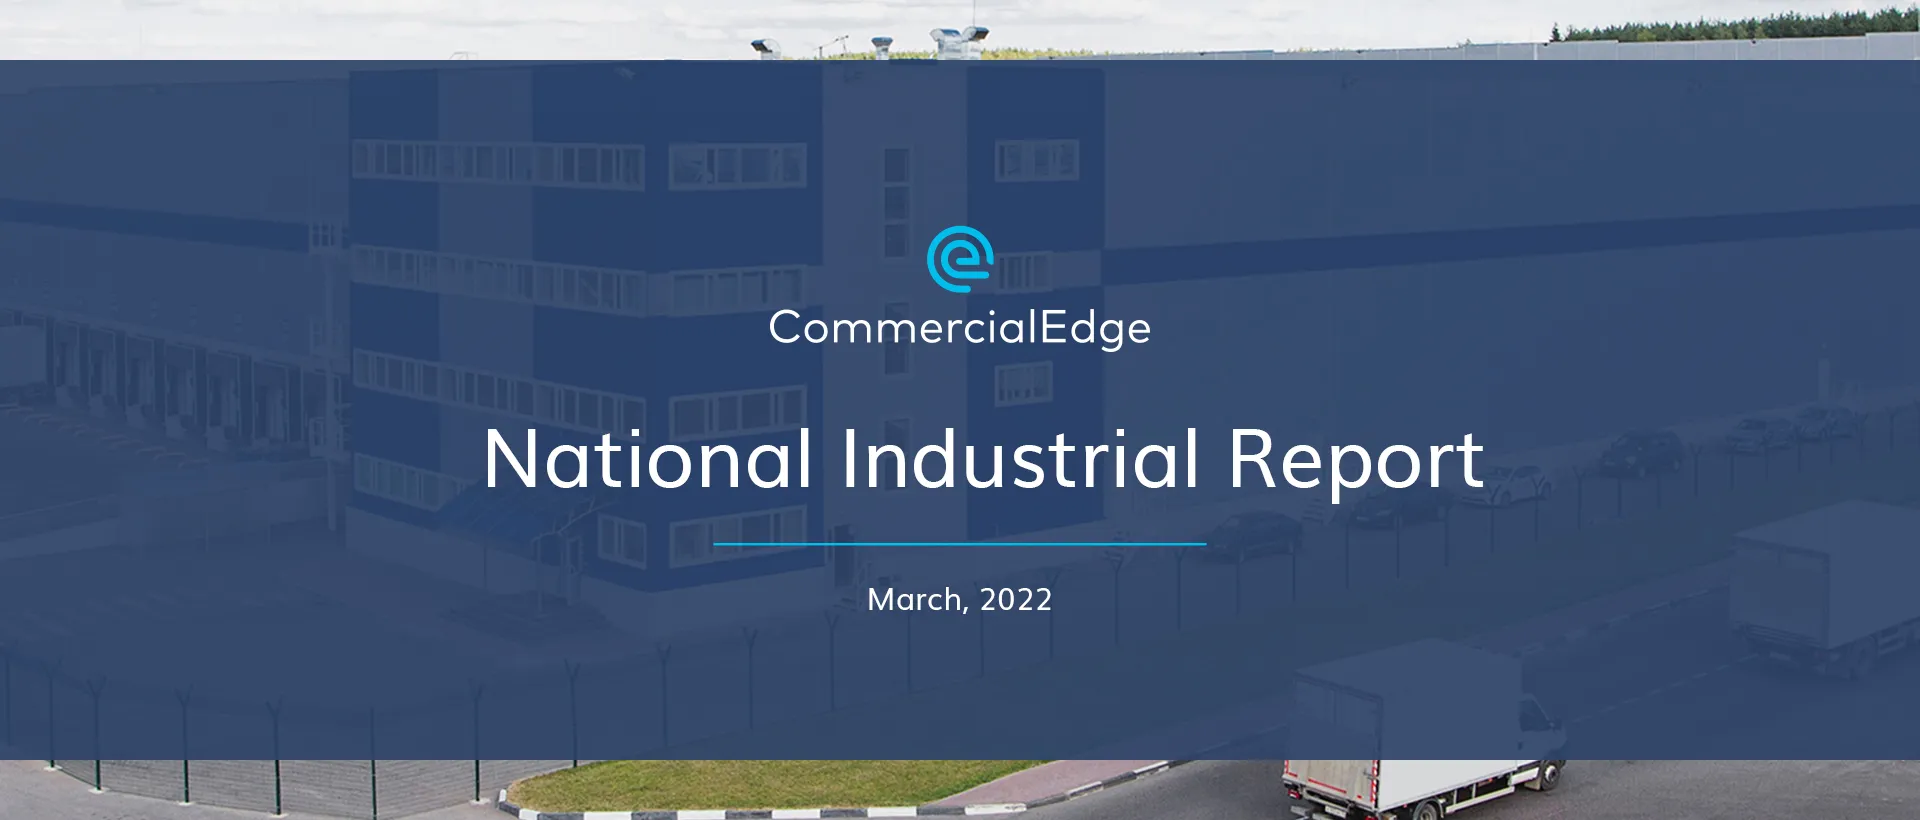 CommercialEdge National Industrial Report March 2022